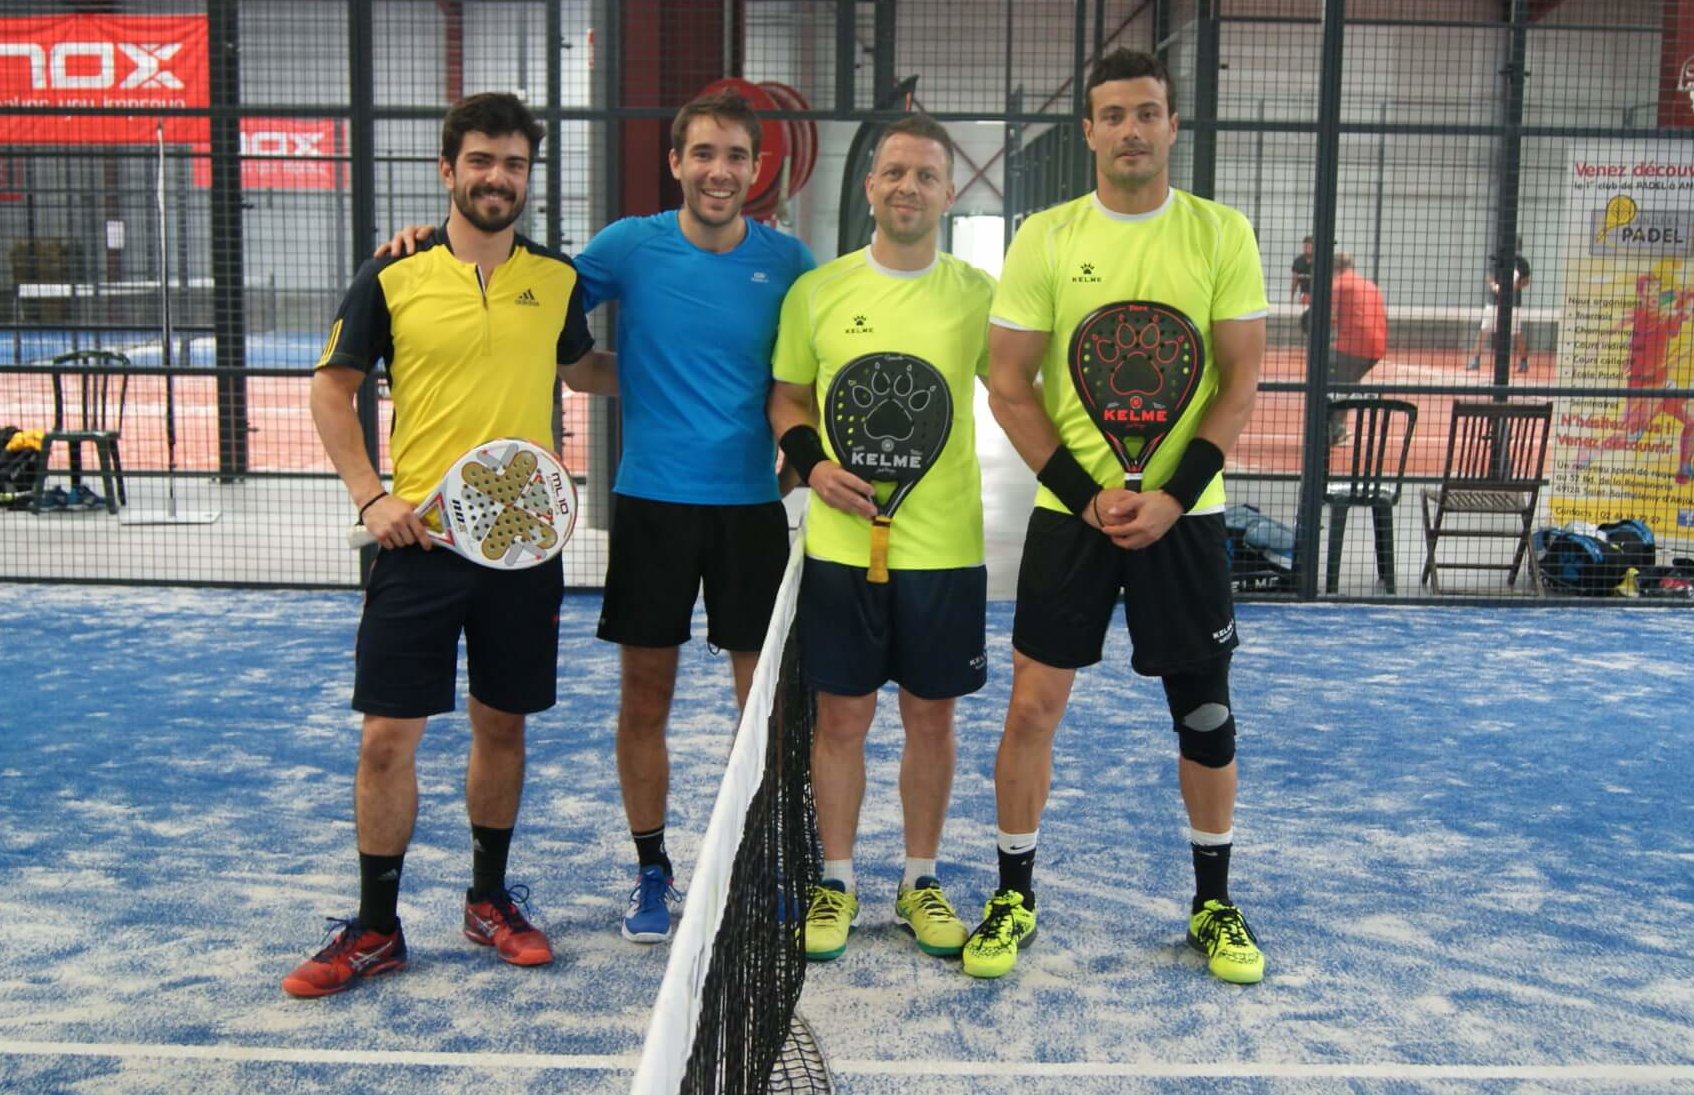 Maucourt / Boilevin bei P500 d'Angers Padel